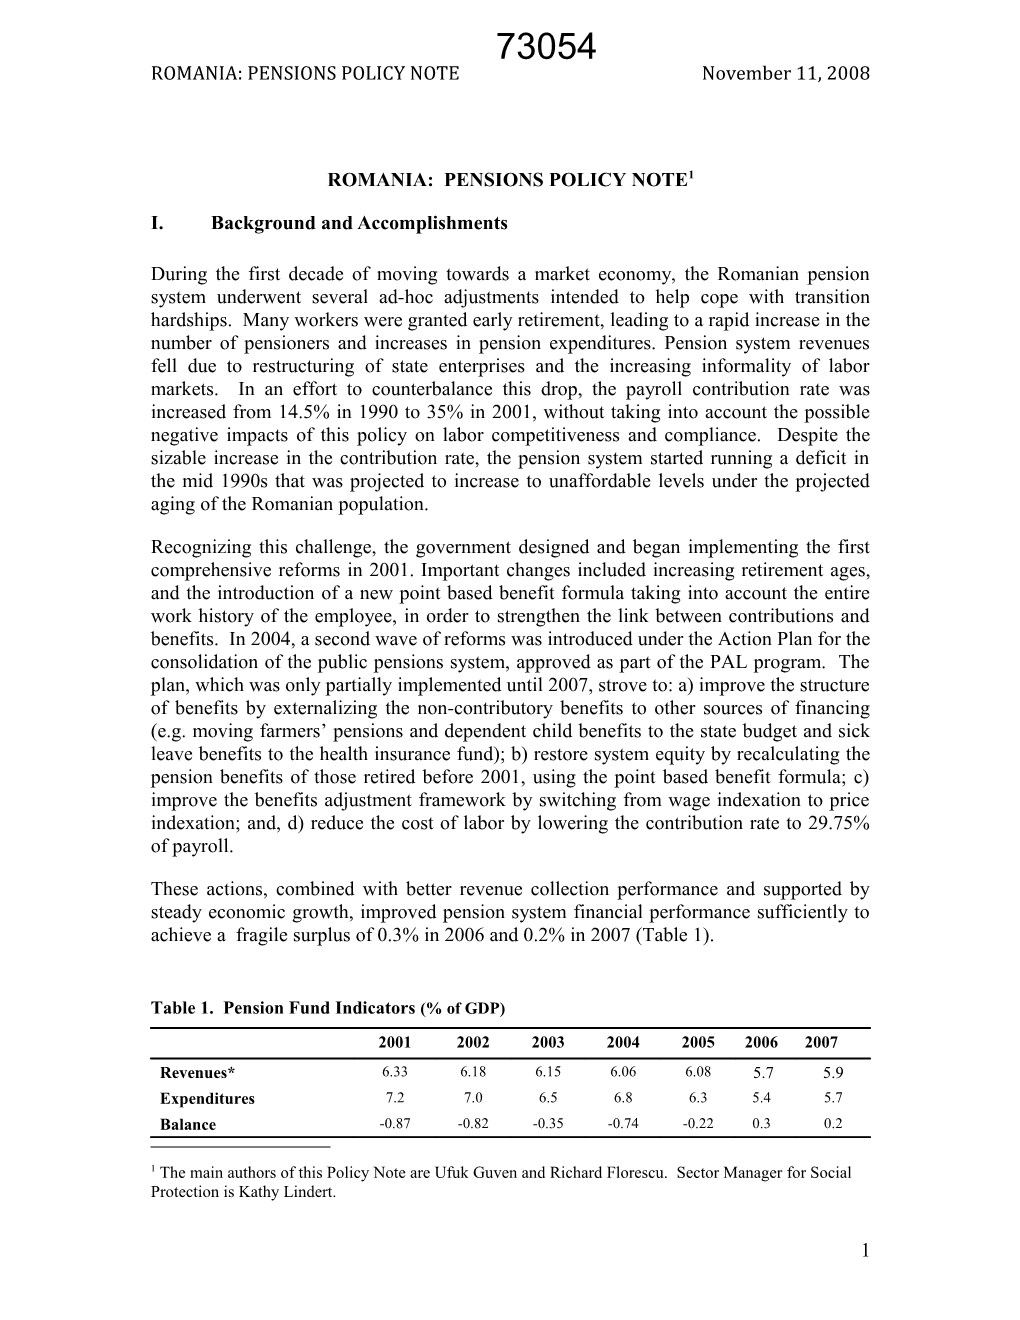 Romania Pensions Policy Note